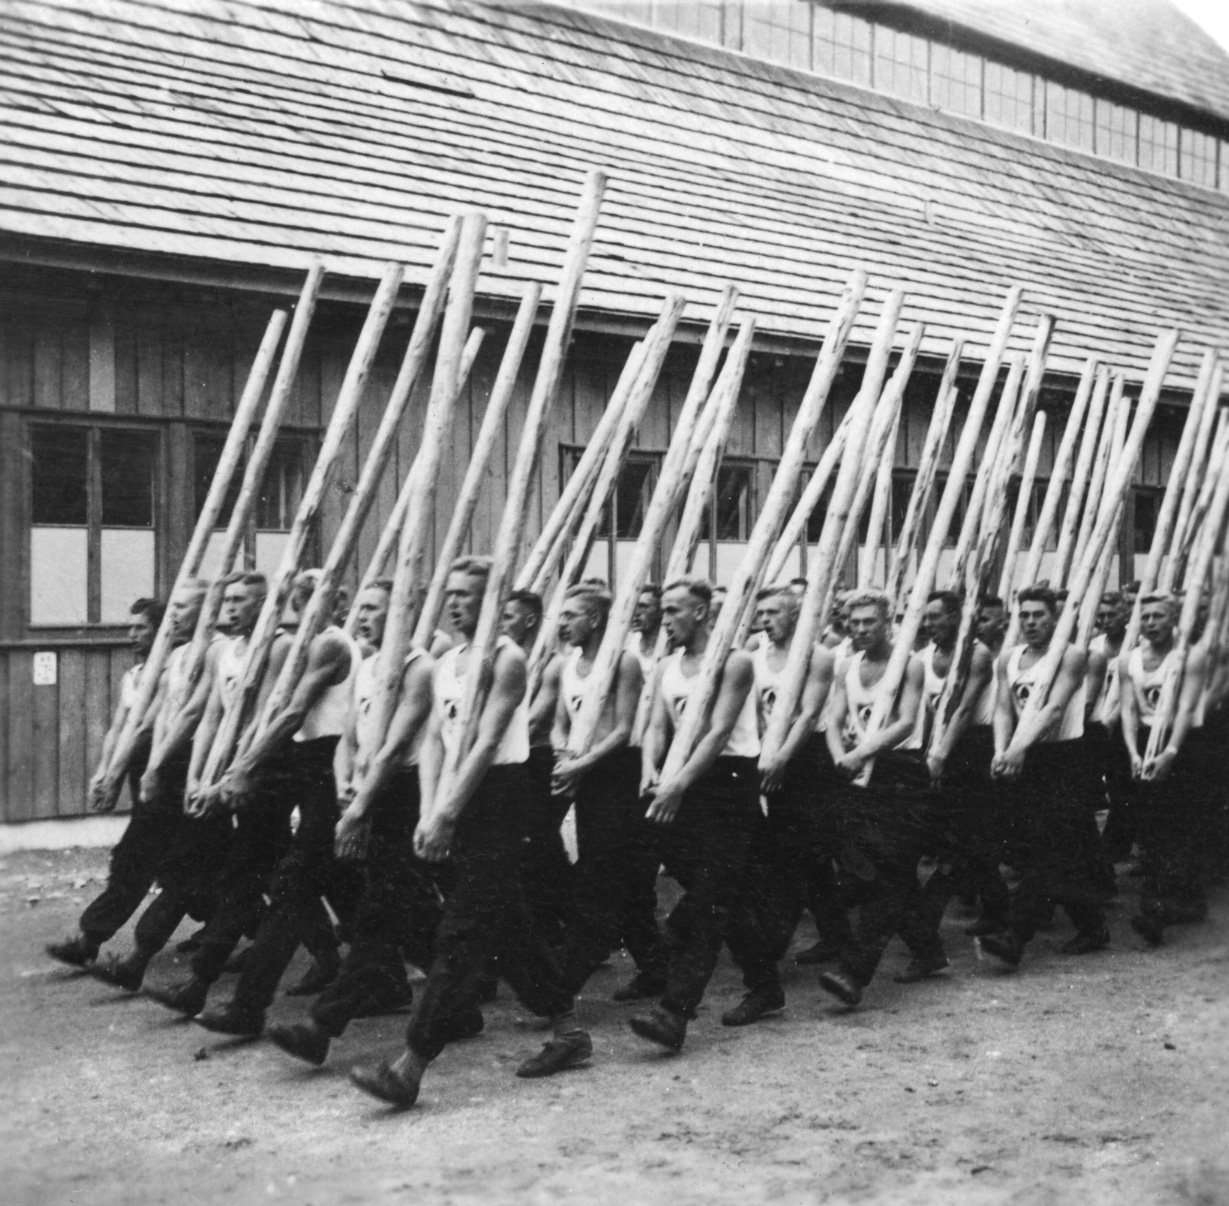 Karl’s RAD unit marching with heavy poles as part of its physical training.